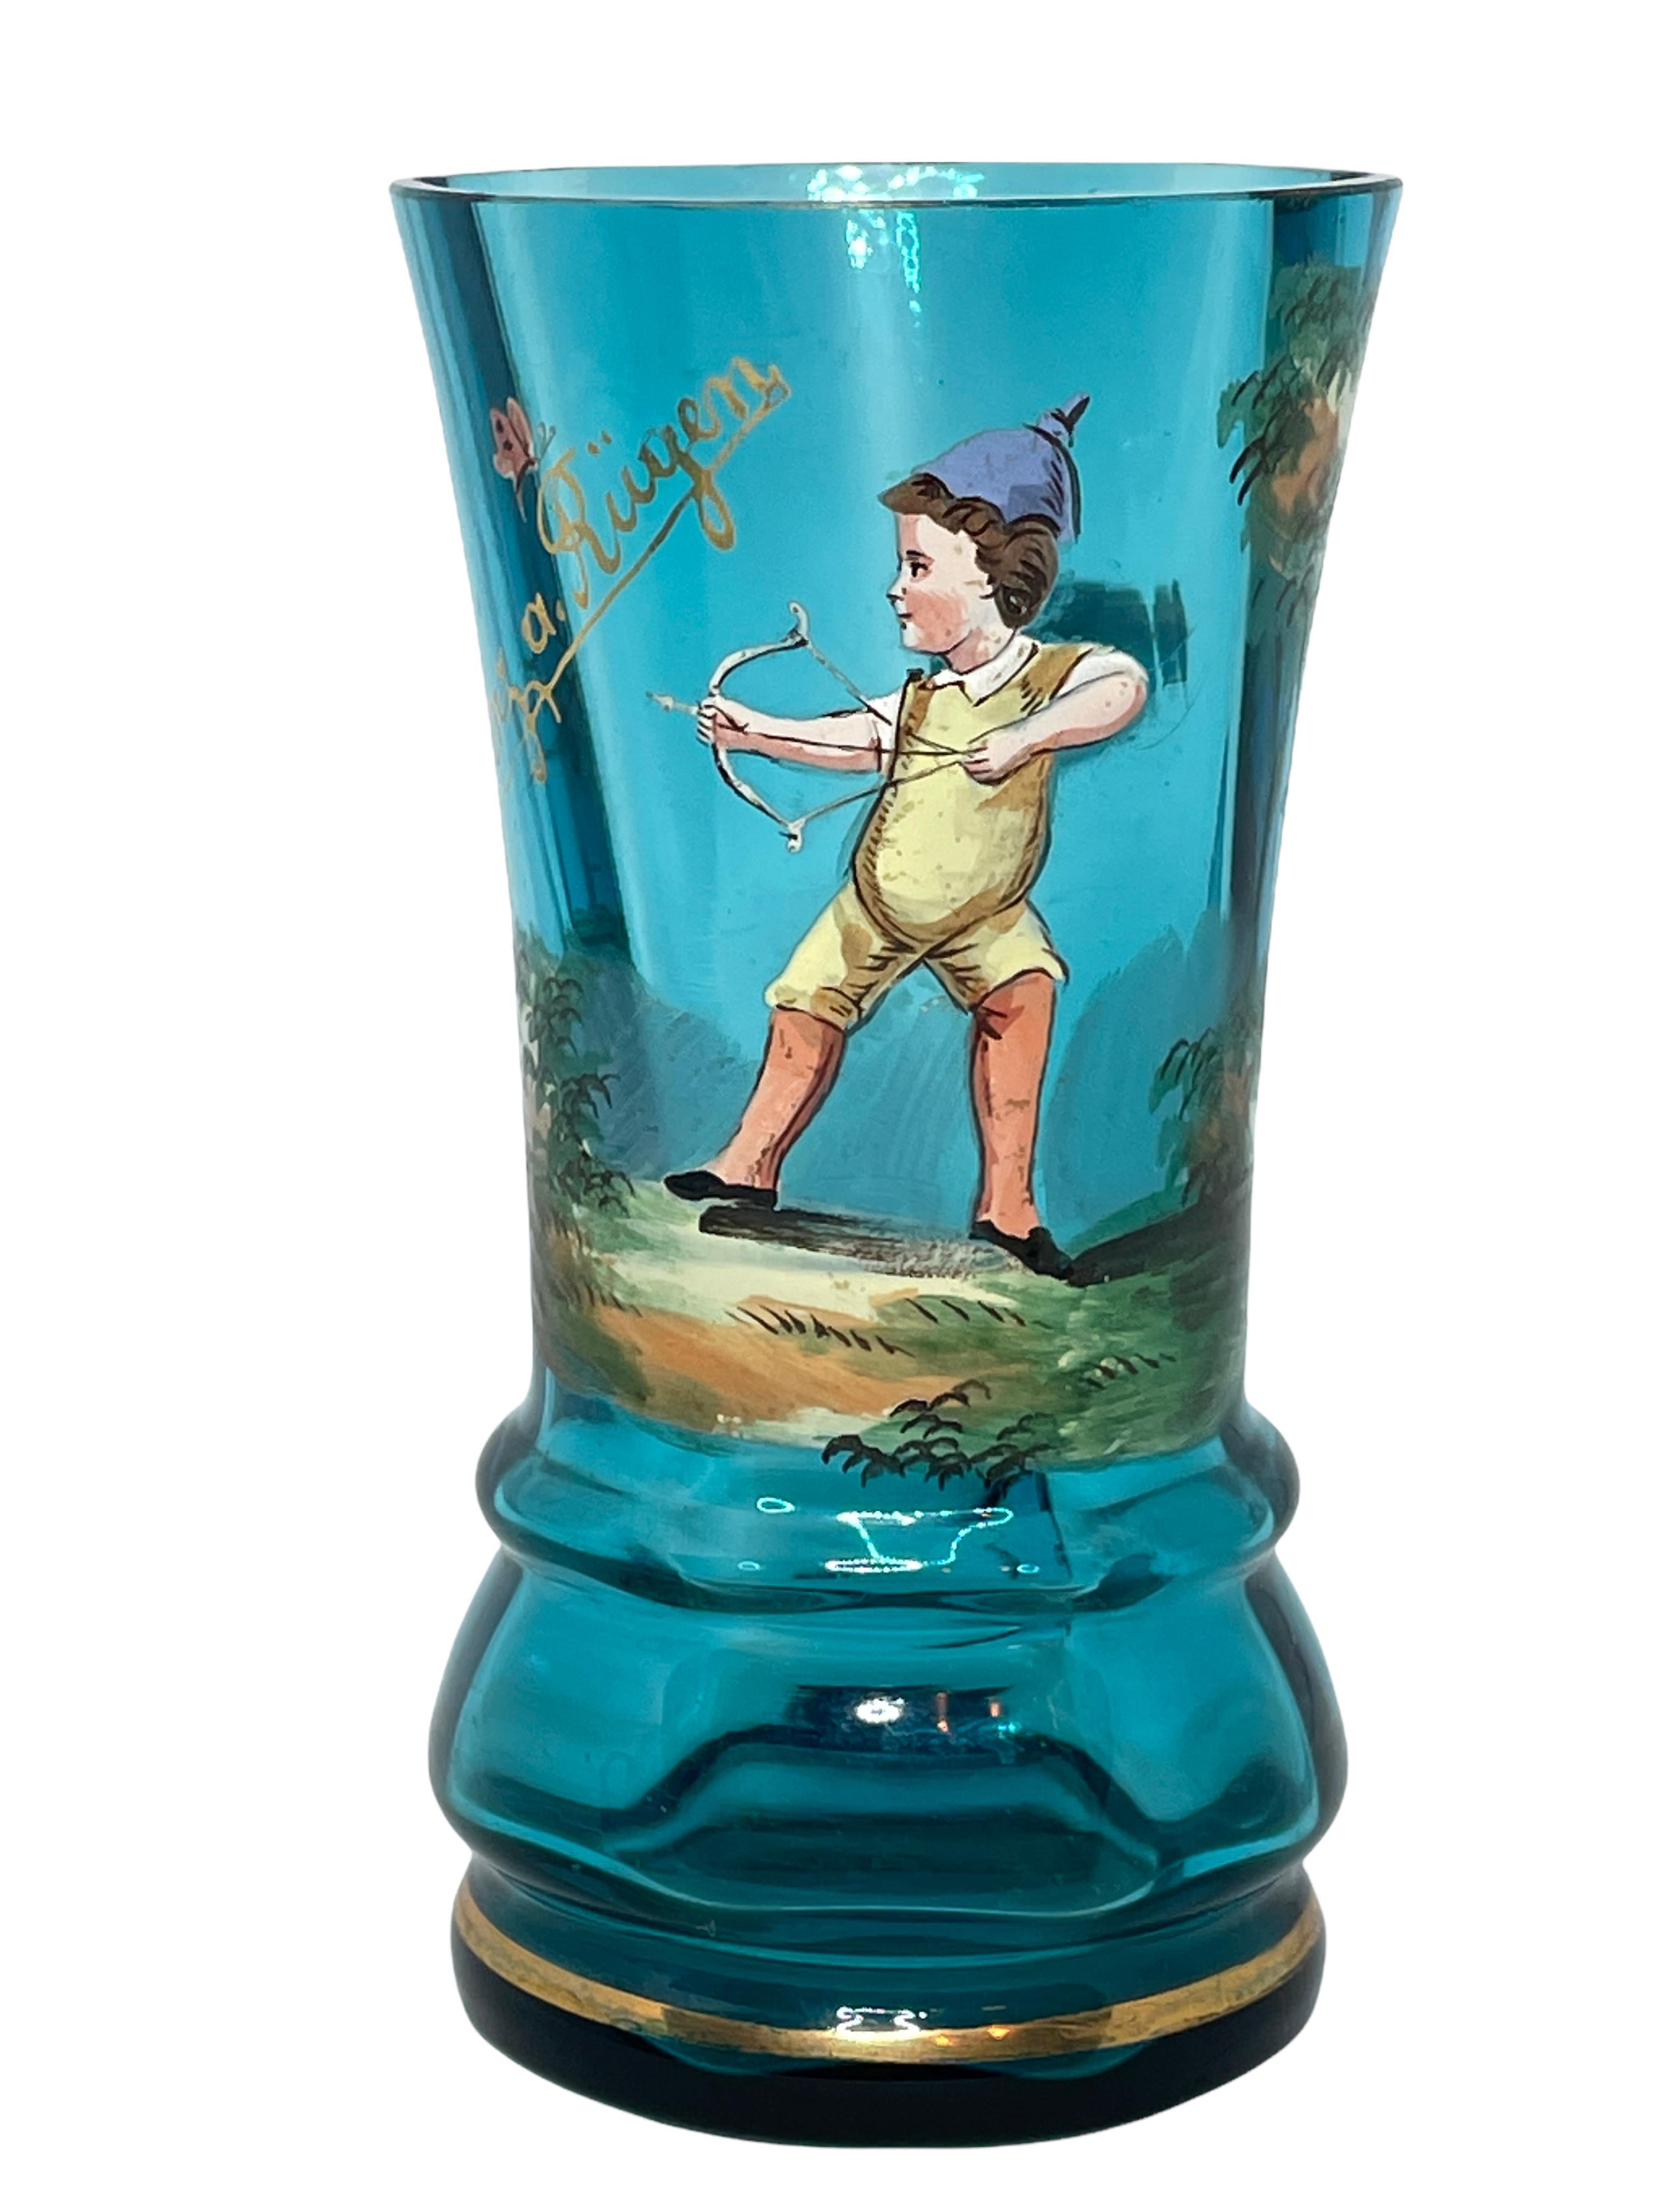 Wonderful antique German glass. This beautiful blue colored and enamel painted glass brings a touch of opulence to any collection of Mary Gregory Glasses. A nice addition to any room or table.

 